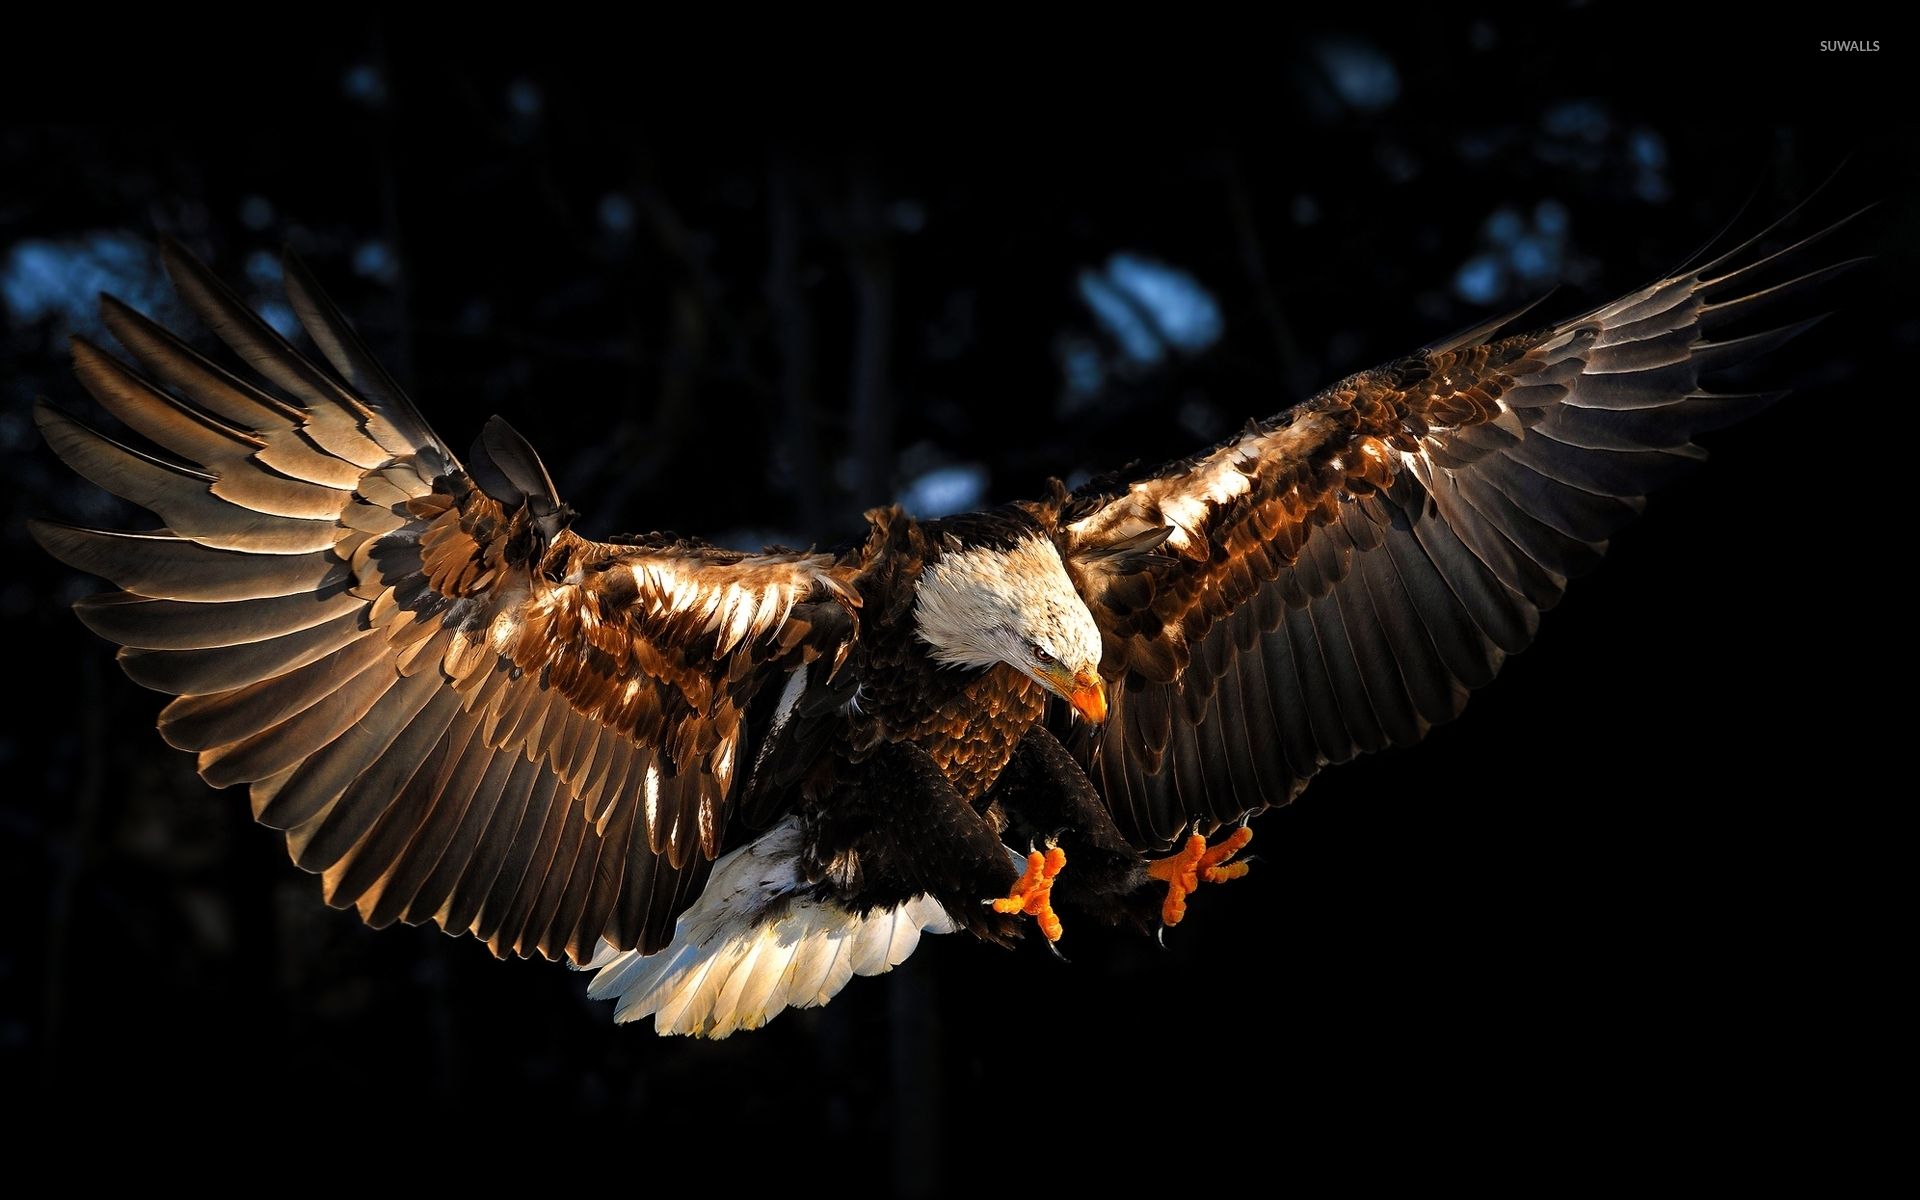 Bald eagle with wings spread wallpaper wallpaper